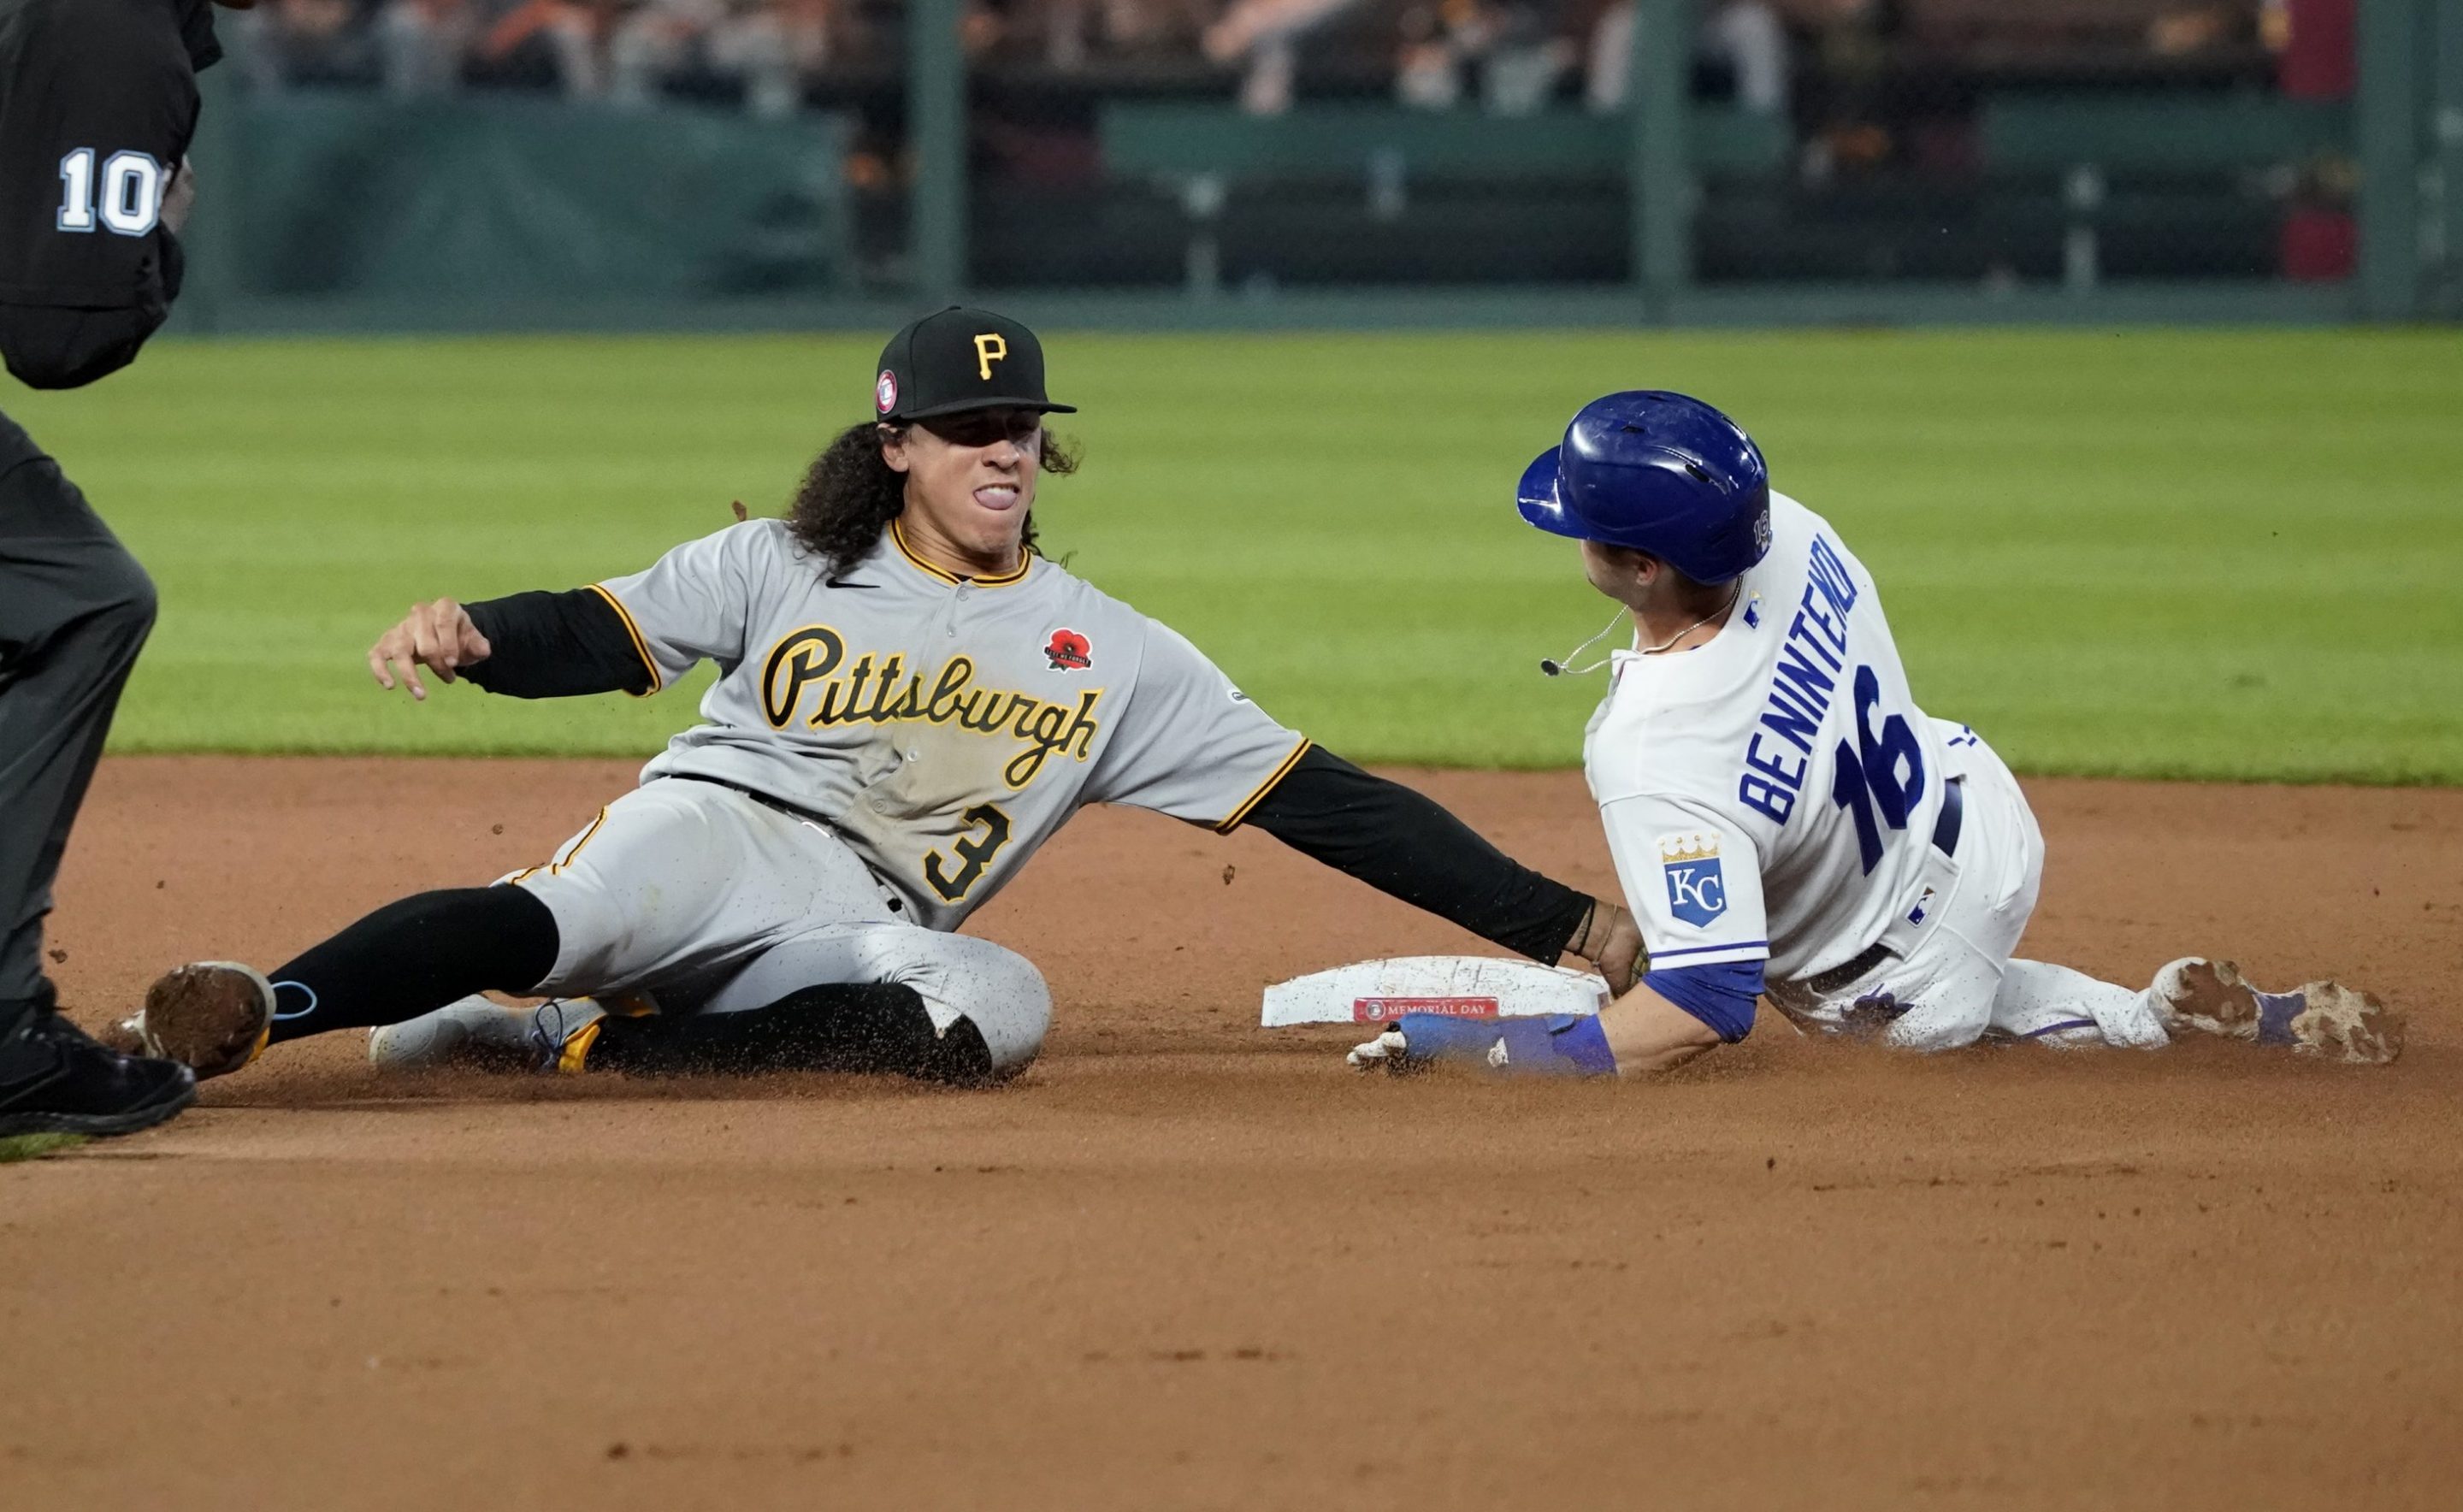 Kansas City Royals runner tagged out by Pittsburgh Pirates fielder